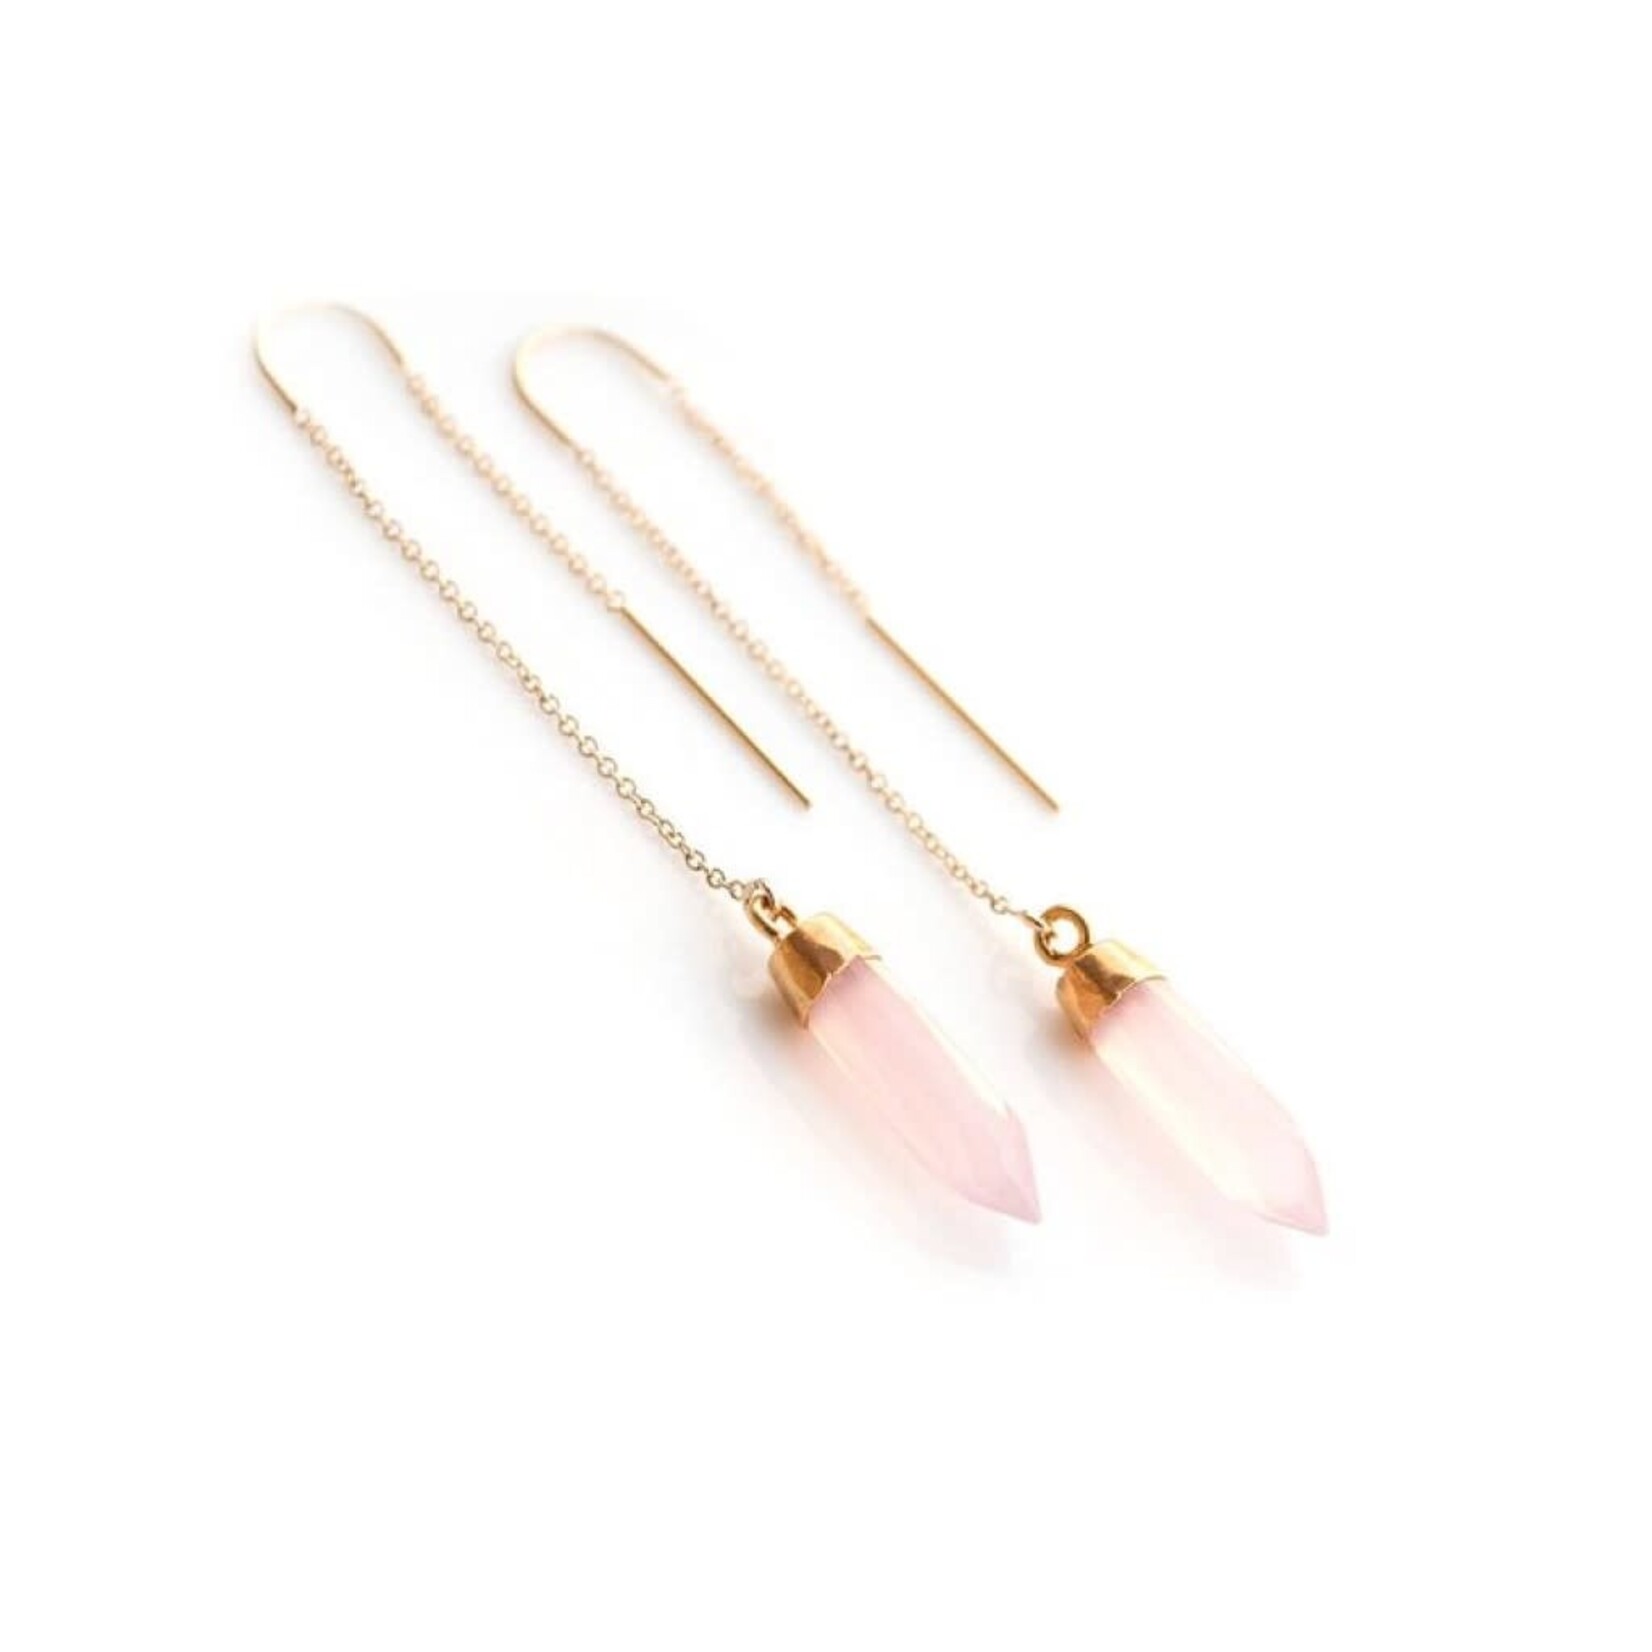 Thread Through Earrings - PInk Chalcedony/Gold